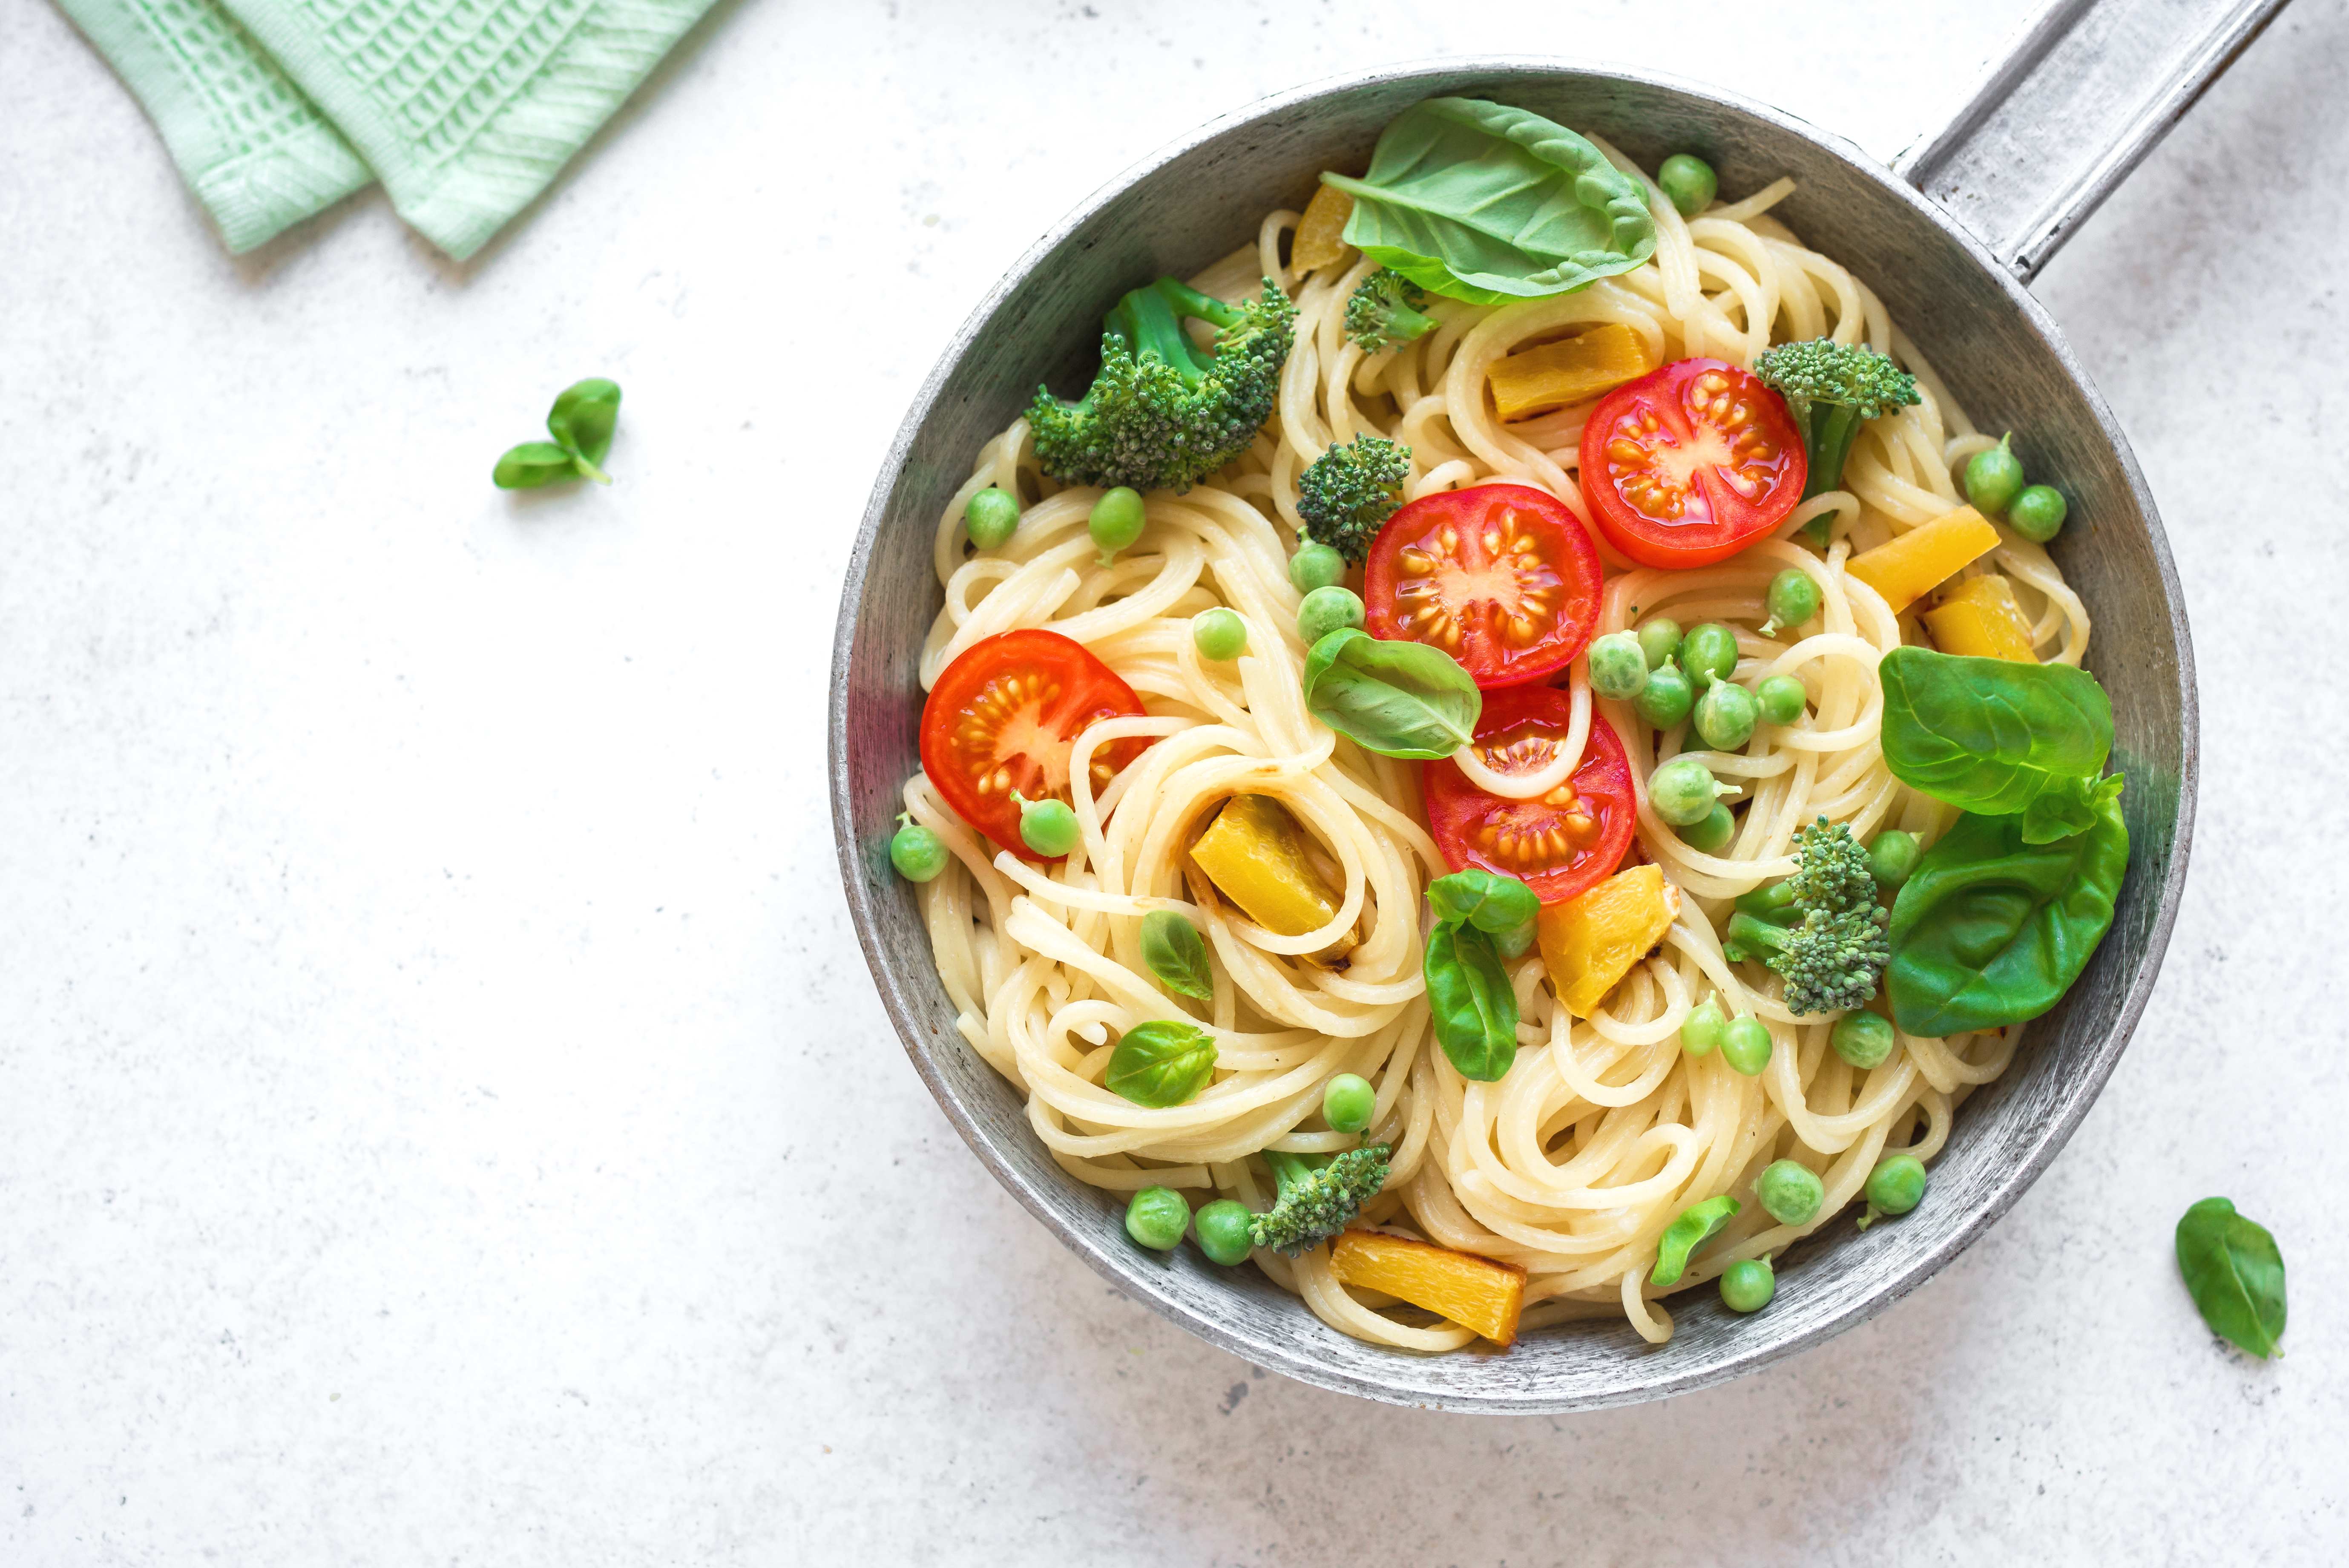 Is Pasta Healthy to Eat? | livestrong